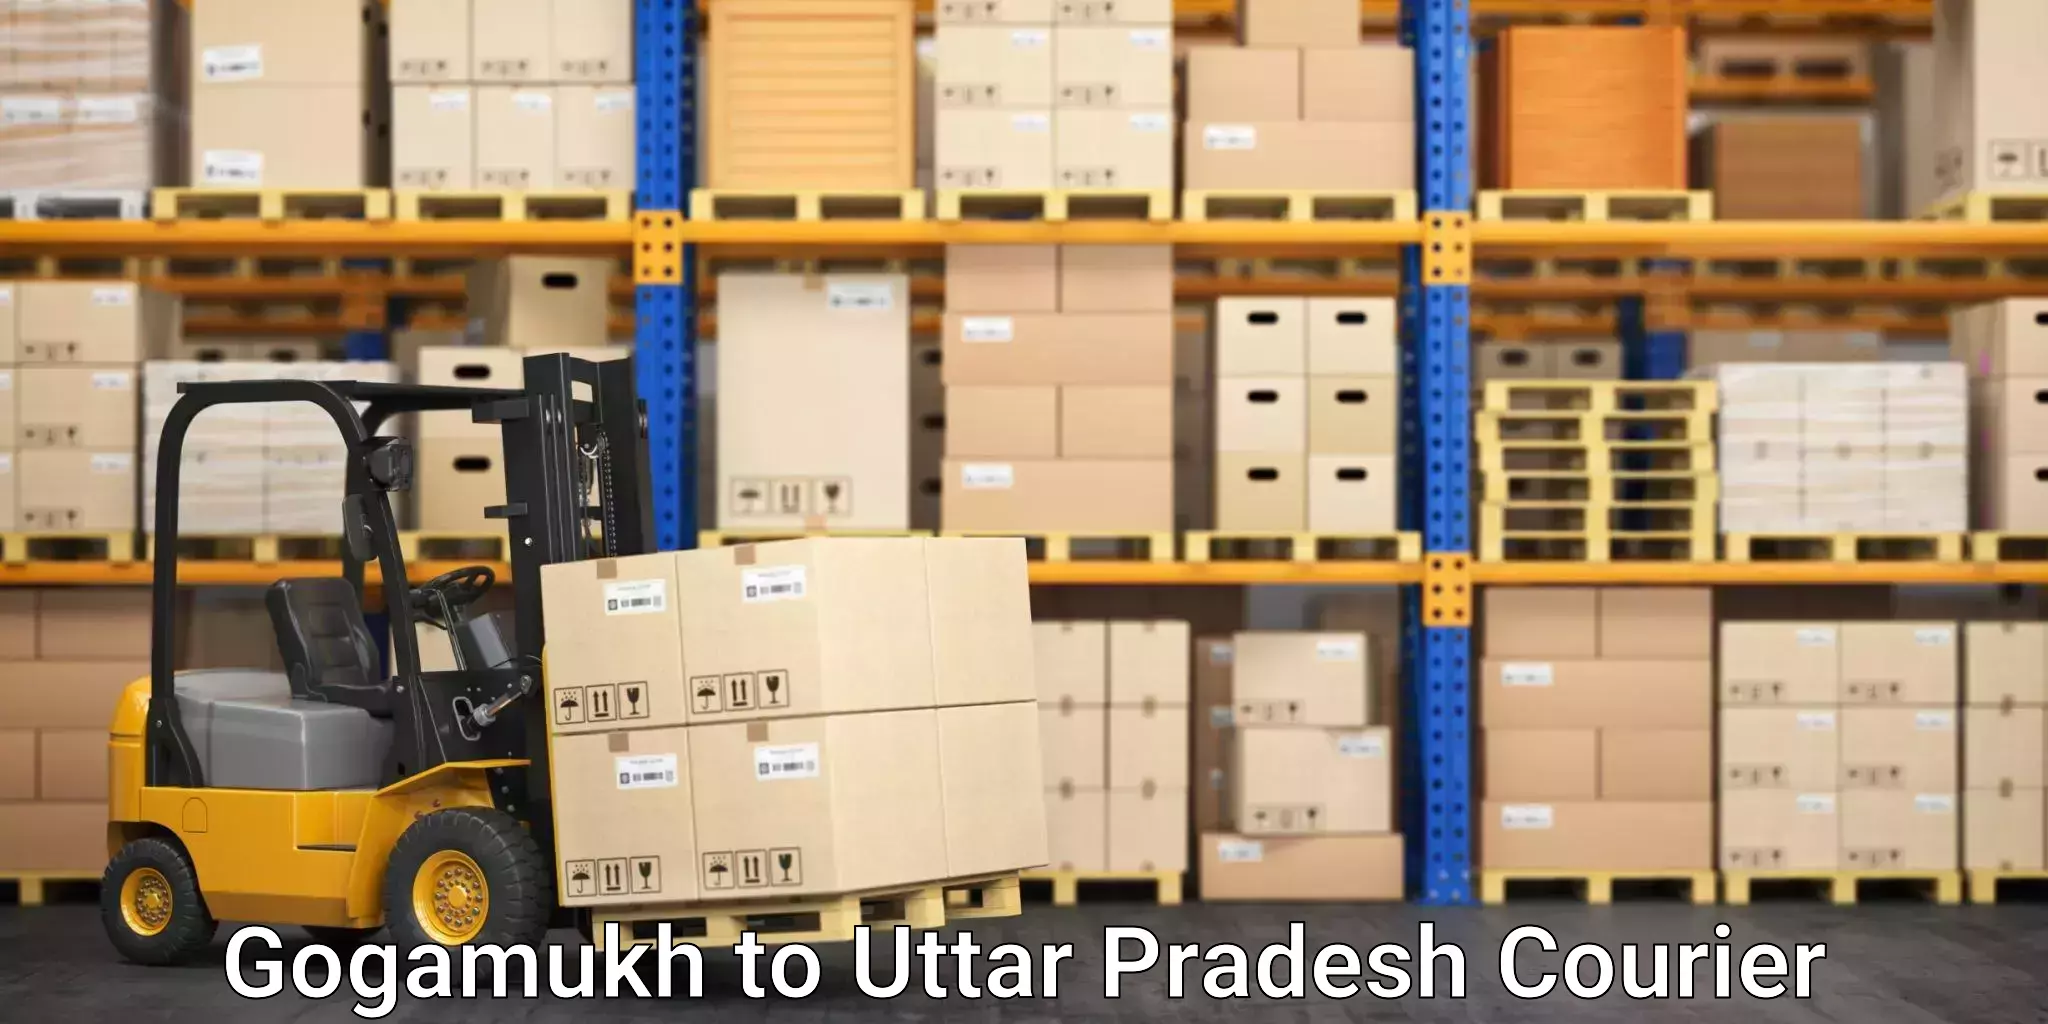 Cost-effective courier options Gogamukh to Saharanpur